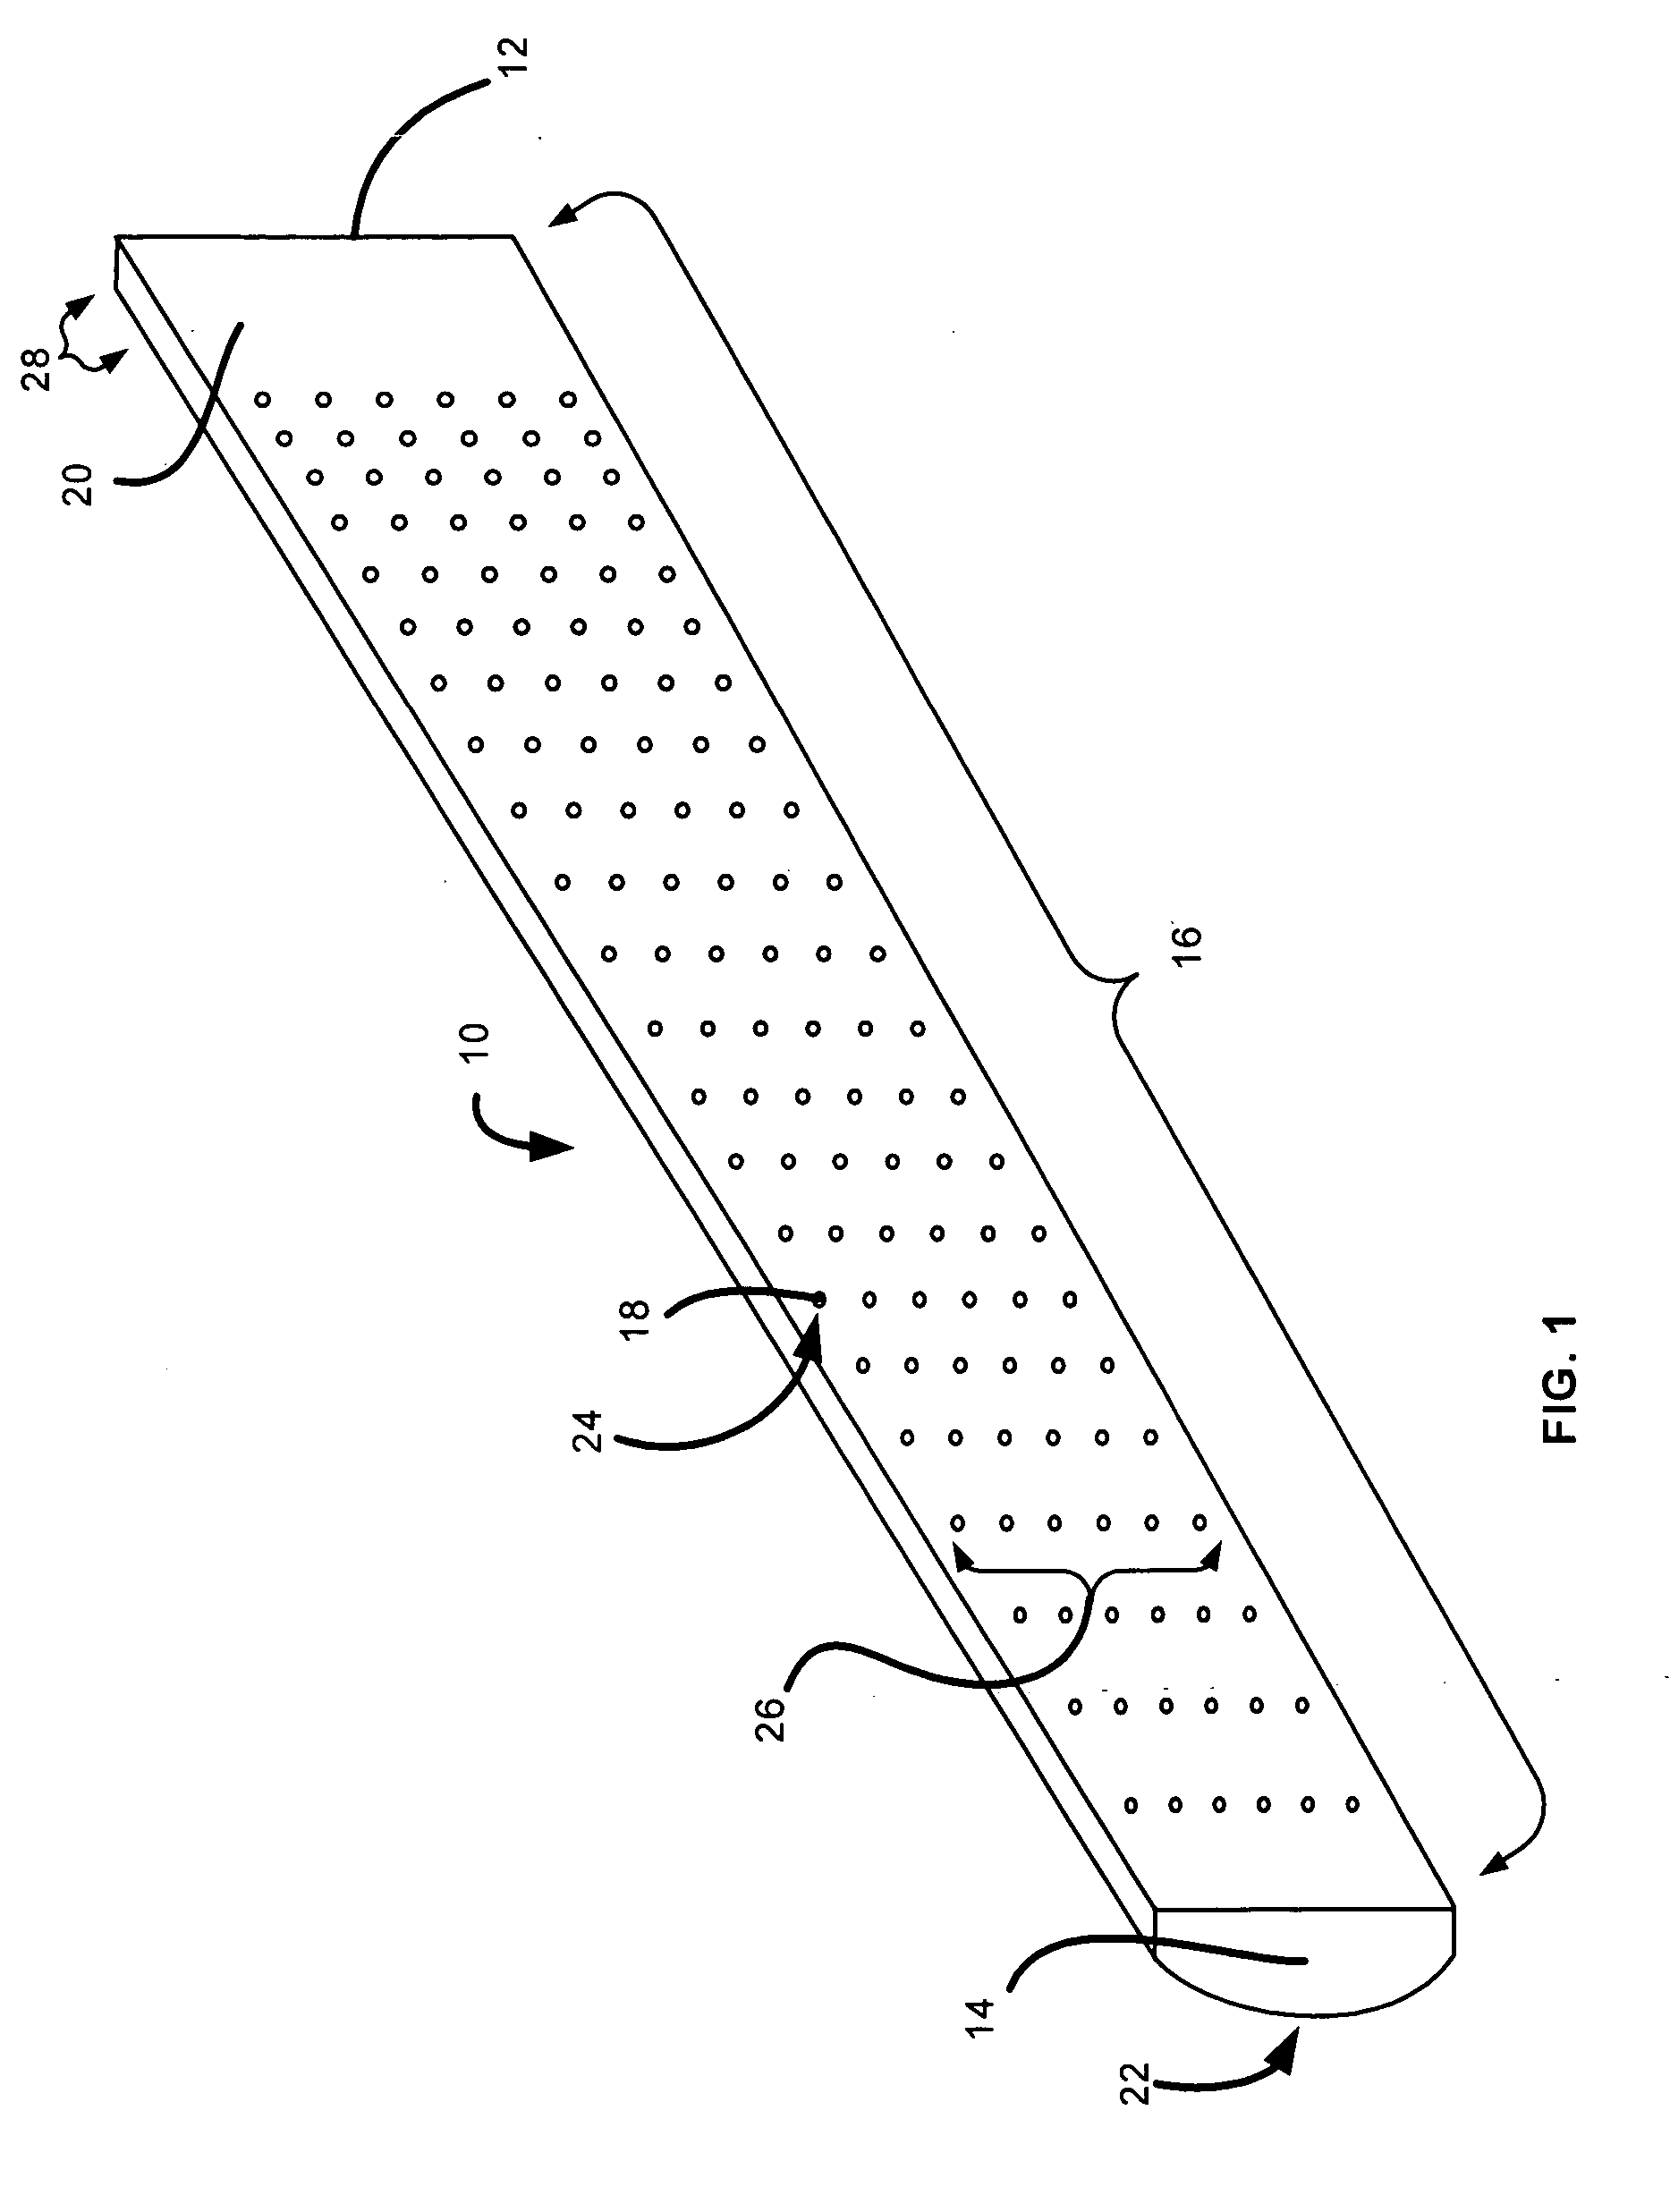 Stringed instrument fingerboard for use with a light-system